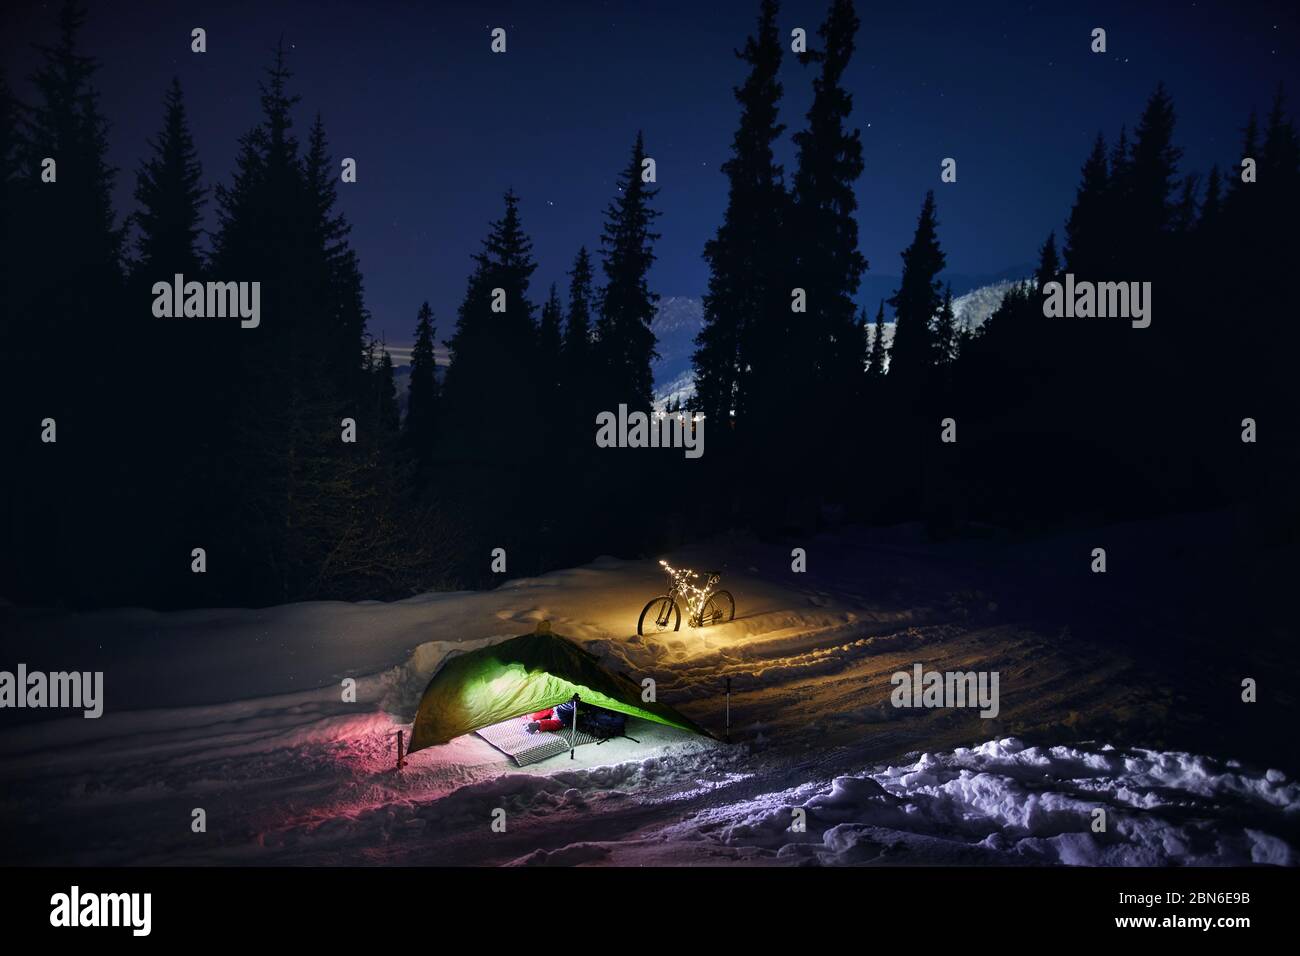 Glowing green tent and Bicycle with Christmas lights at winter forest under night sky with stars. Bikepacking lifestyle and Christmas concept. Stock Photo